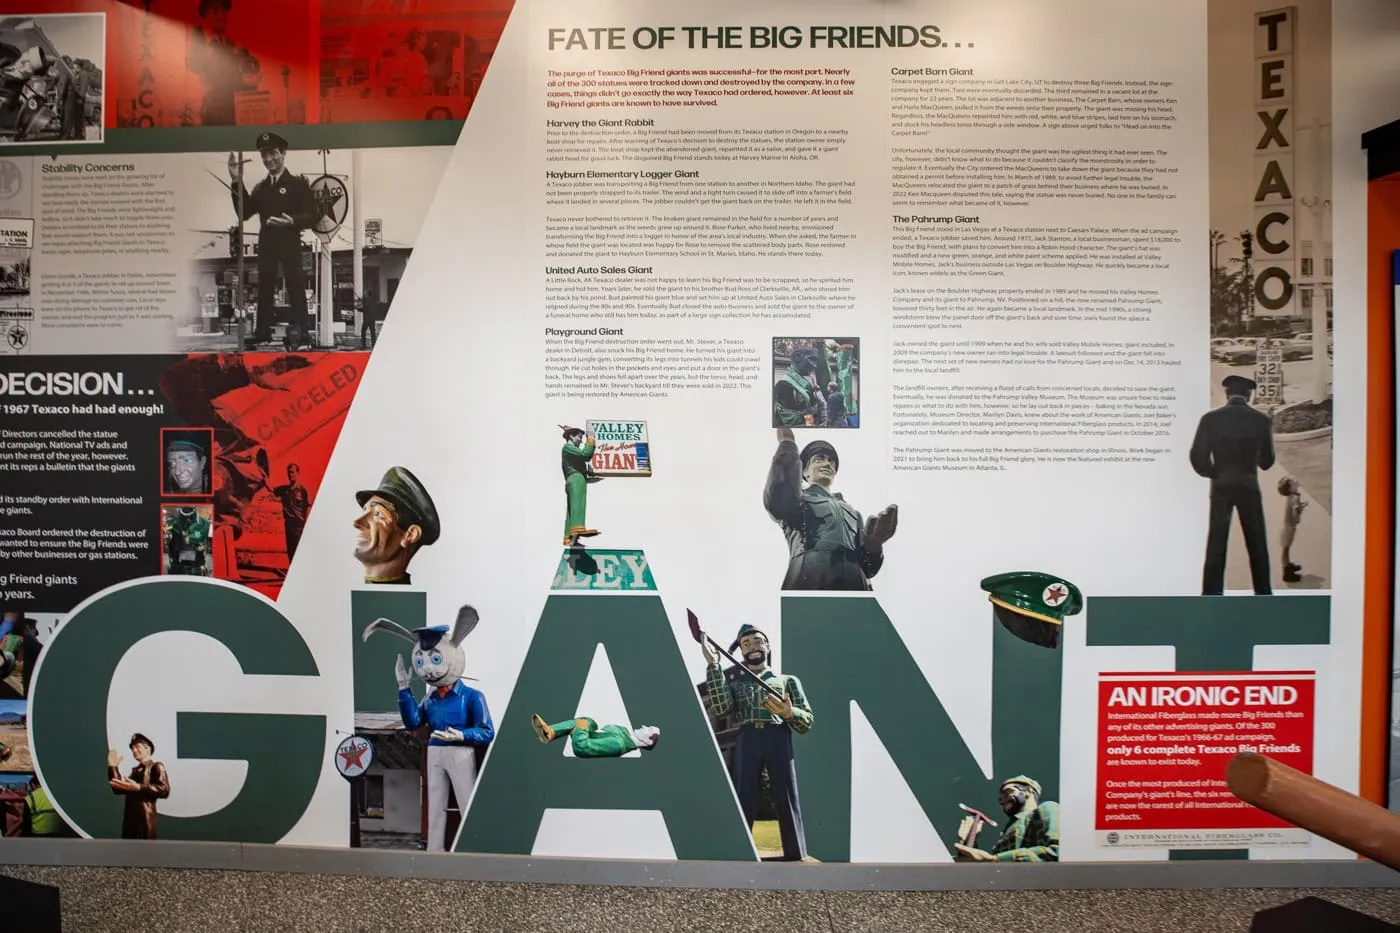 Fate of the Big Friends Display at the American Giants Museum in Atlanta, Illinois